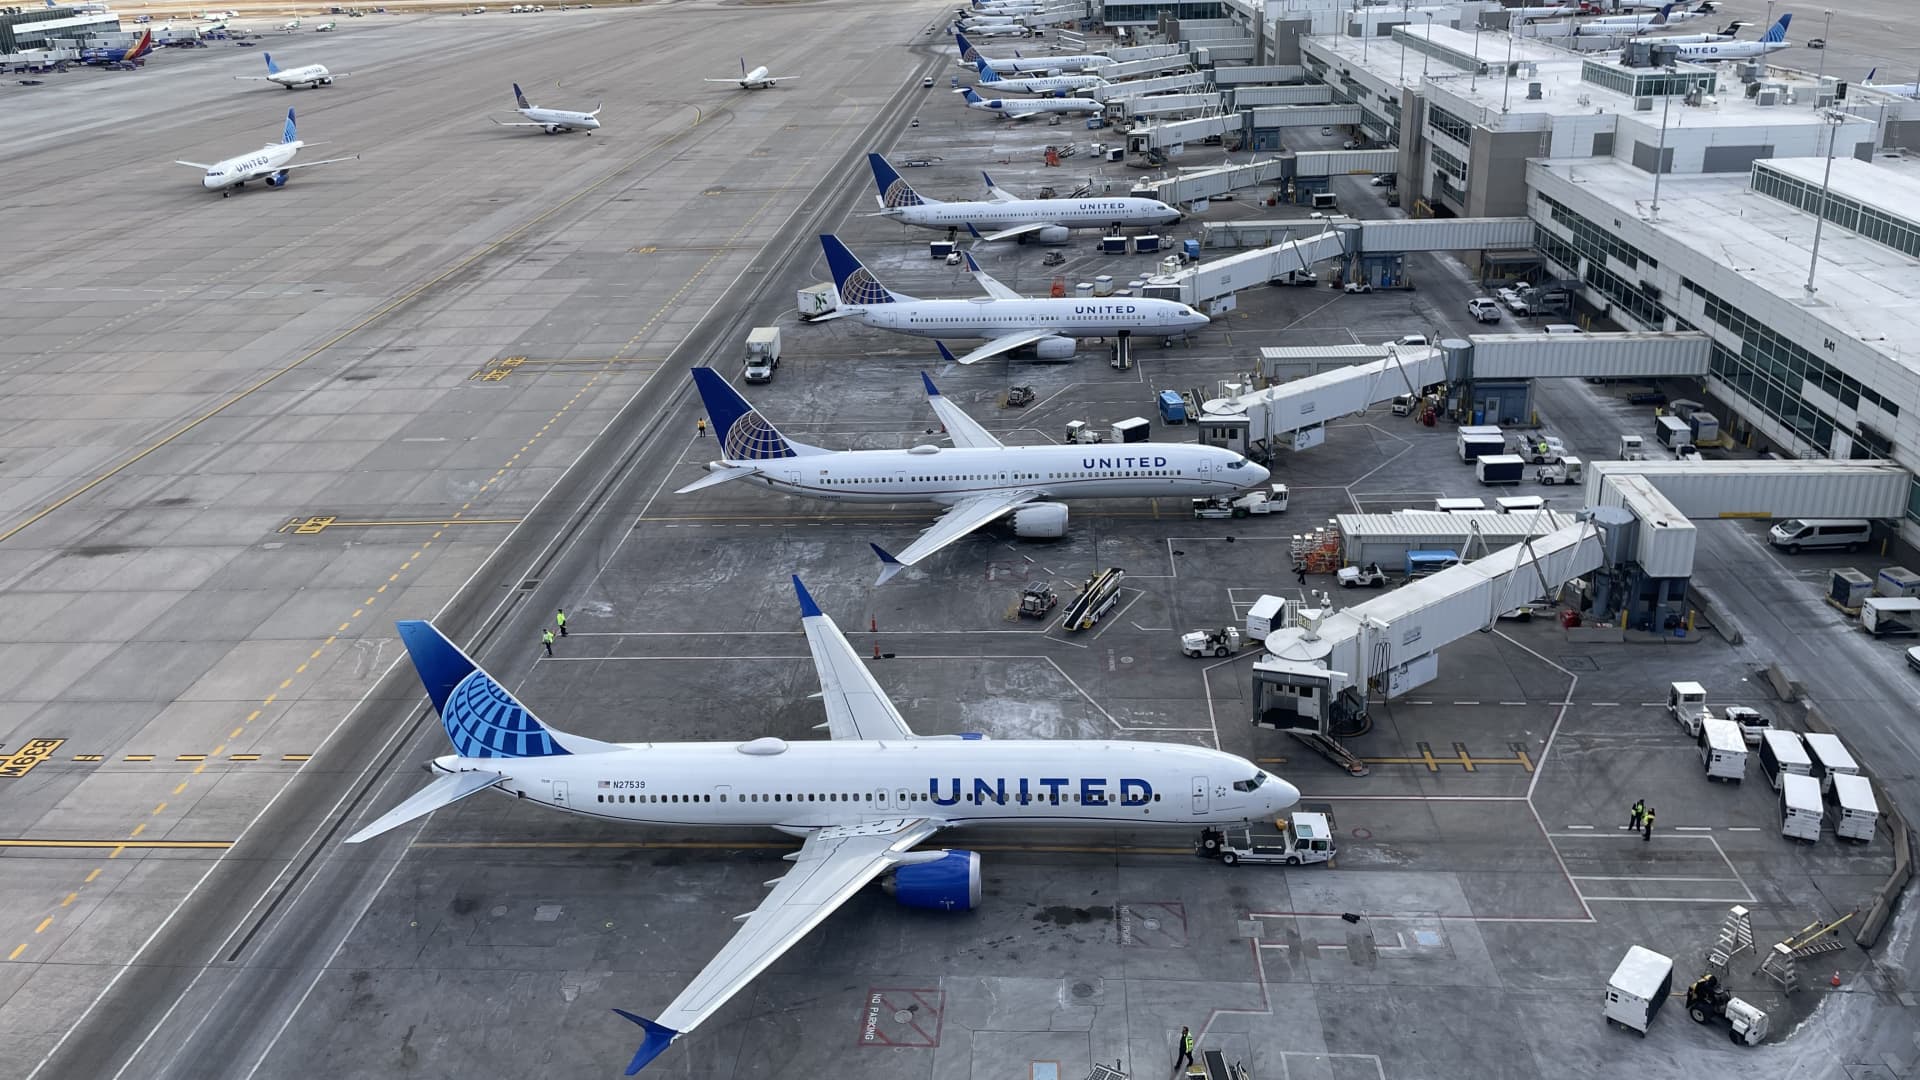 United Airlines planes at Denver International Airport.